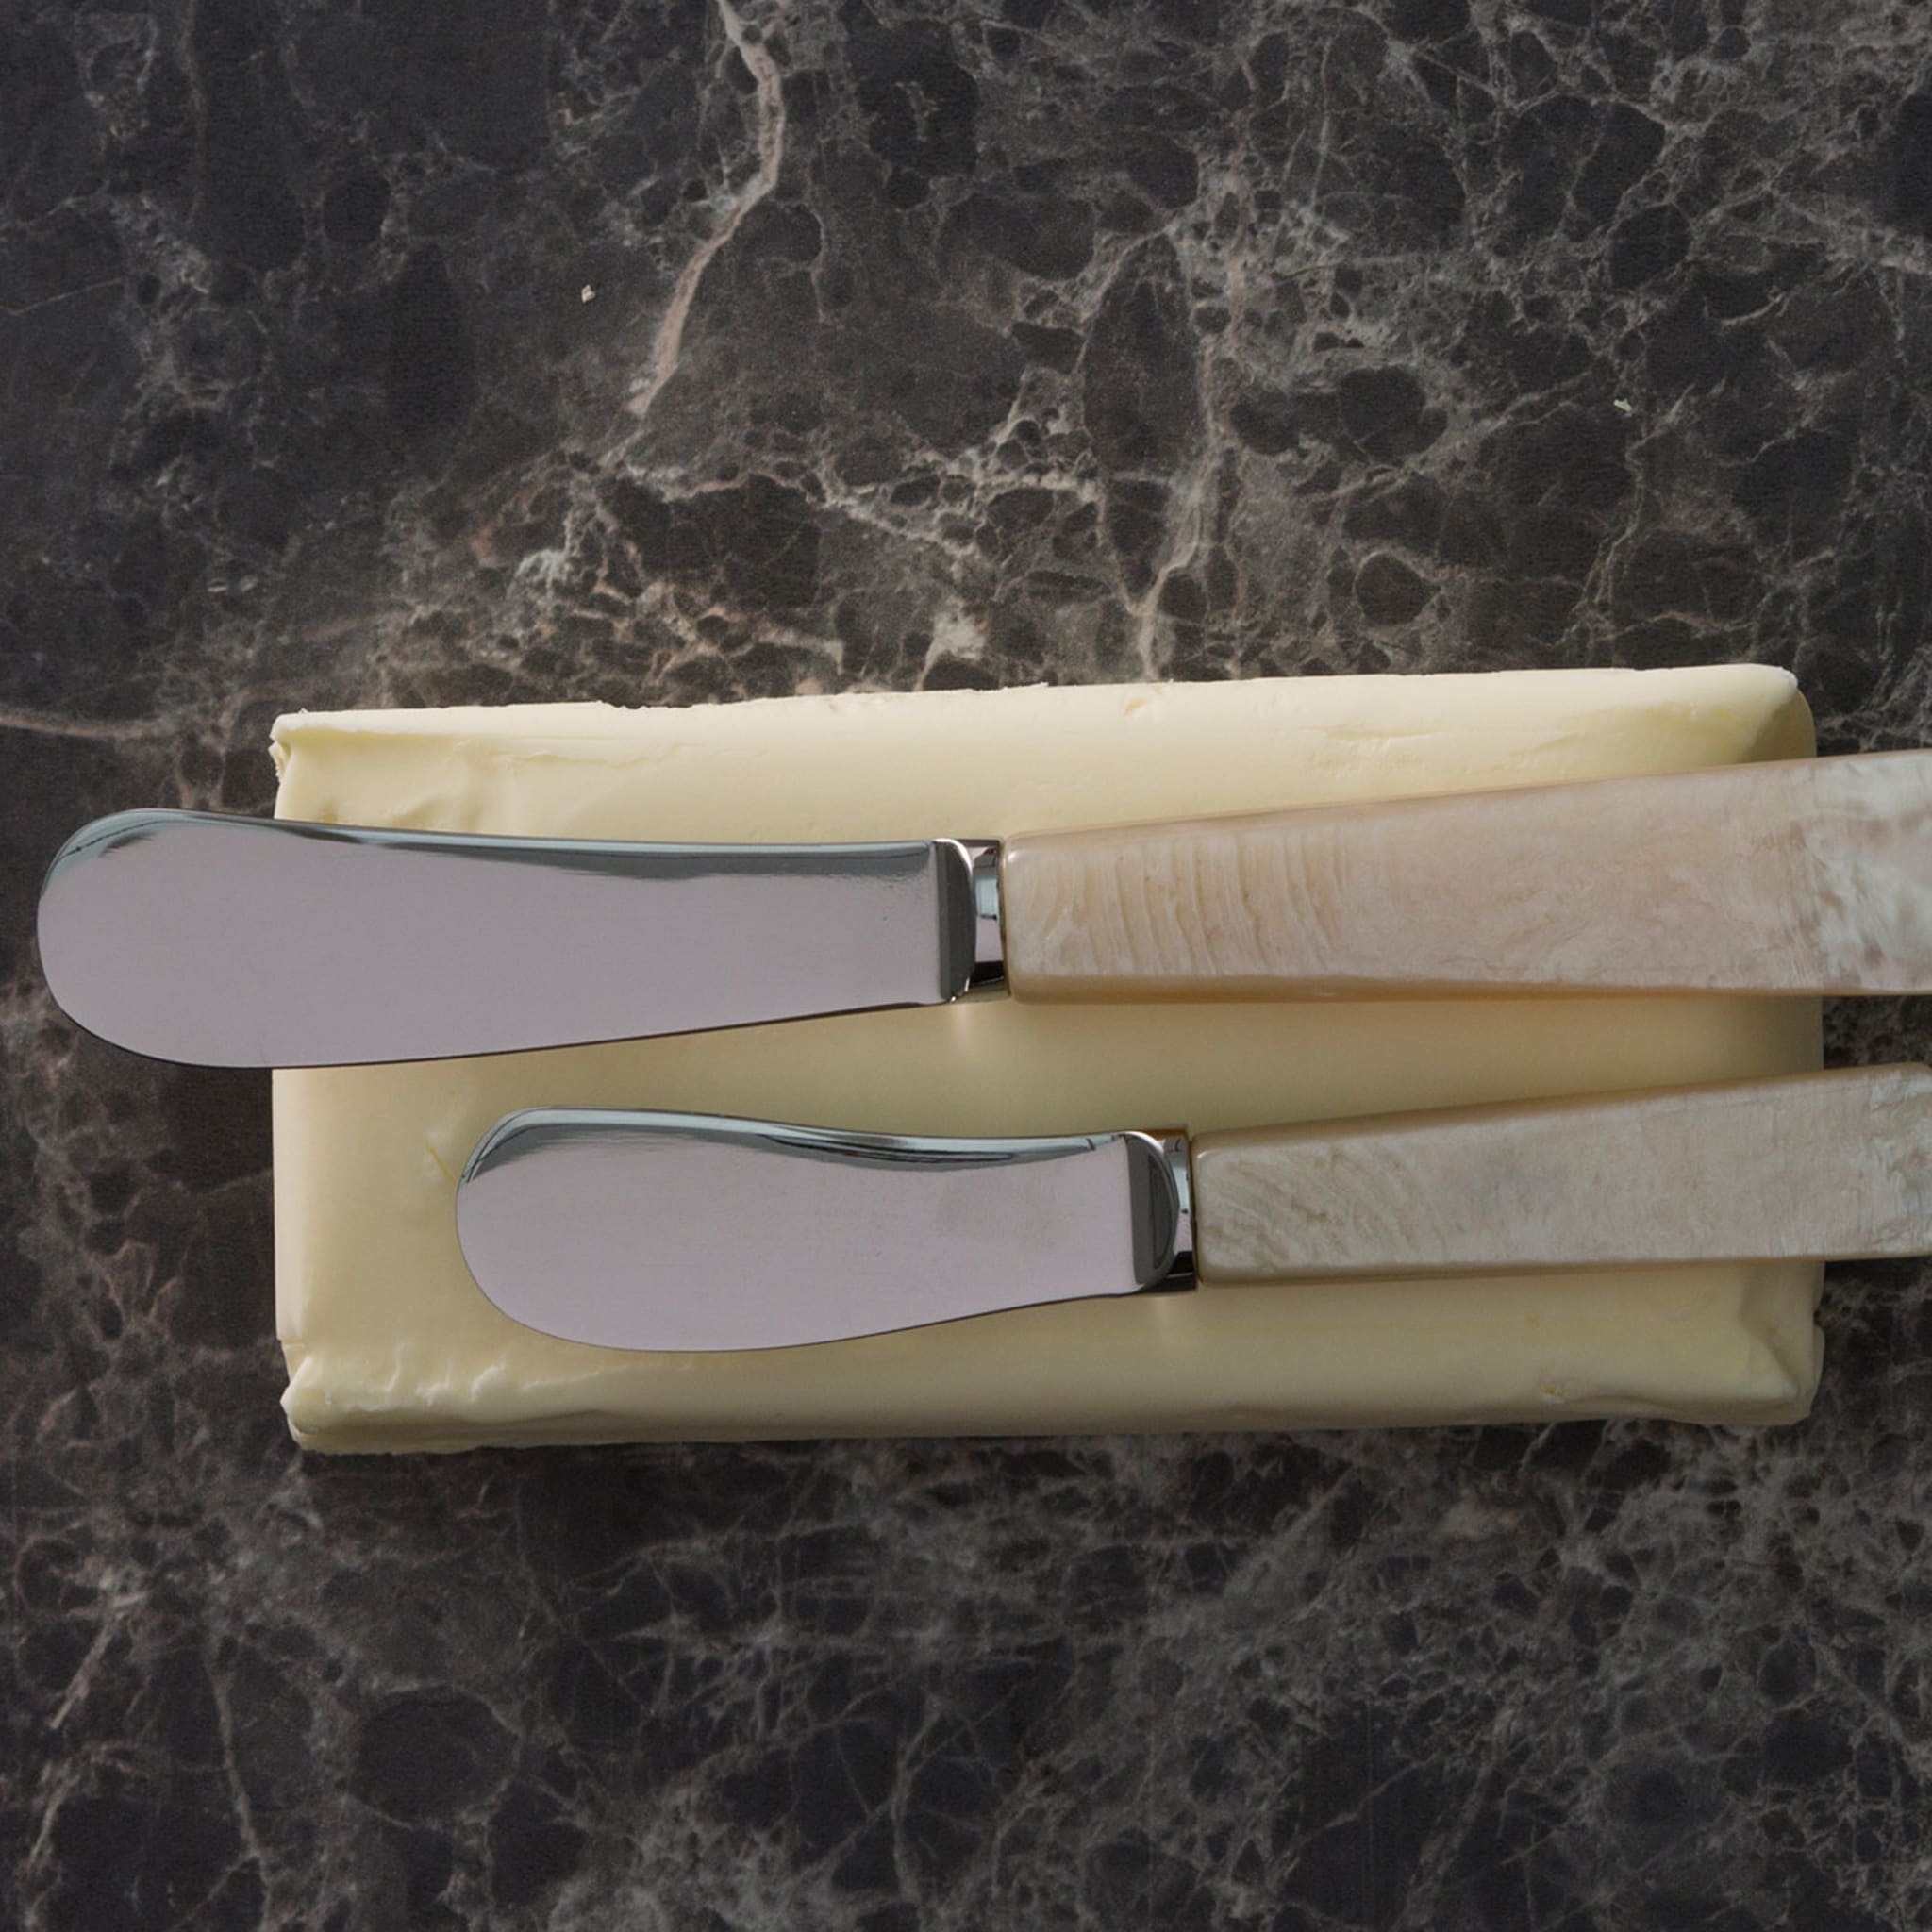 Atlas Set of 3 Cheese Knives - Alternative view 1